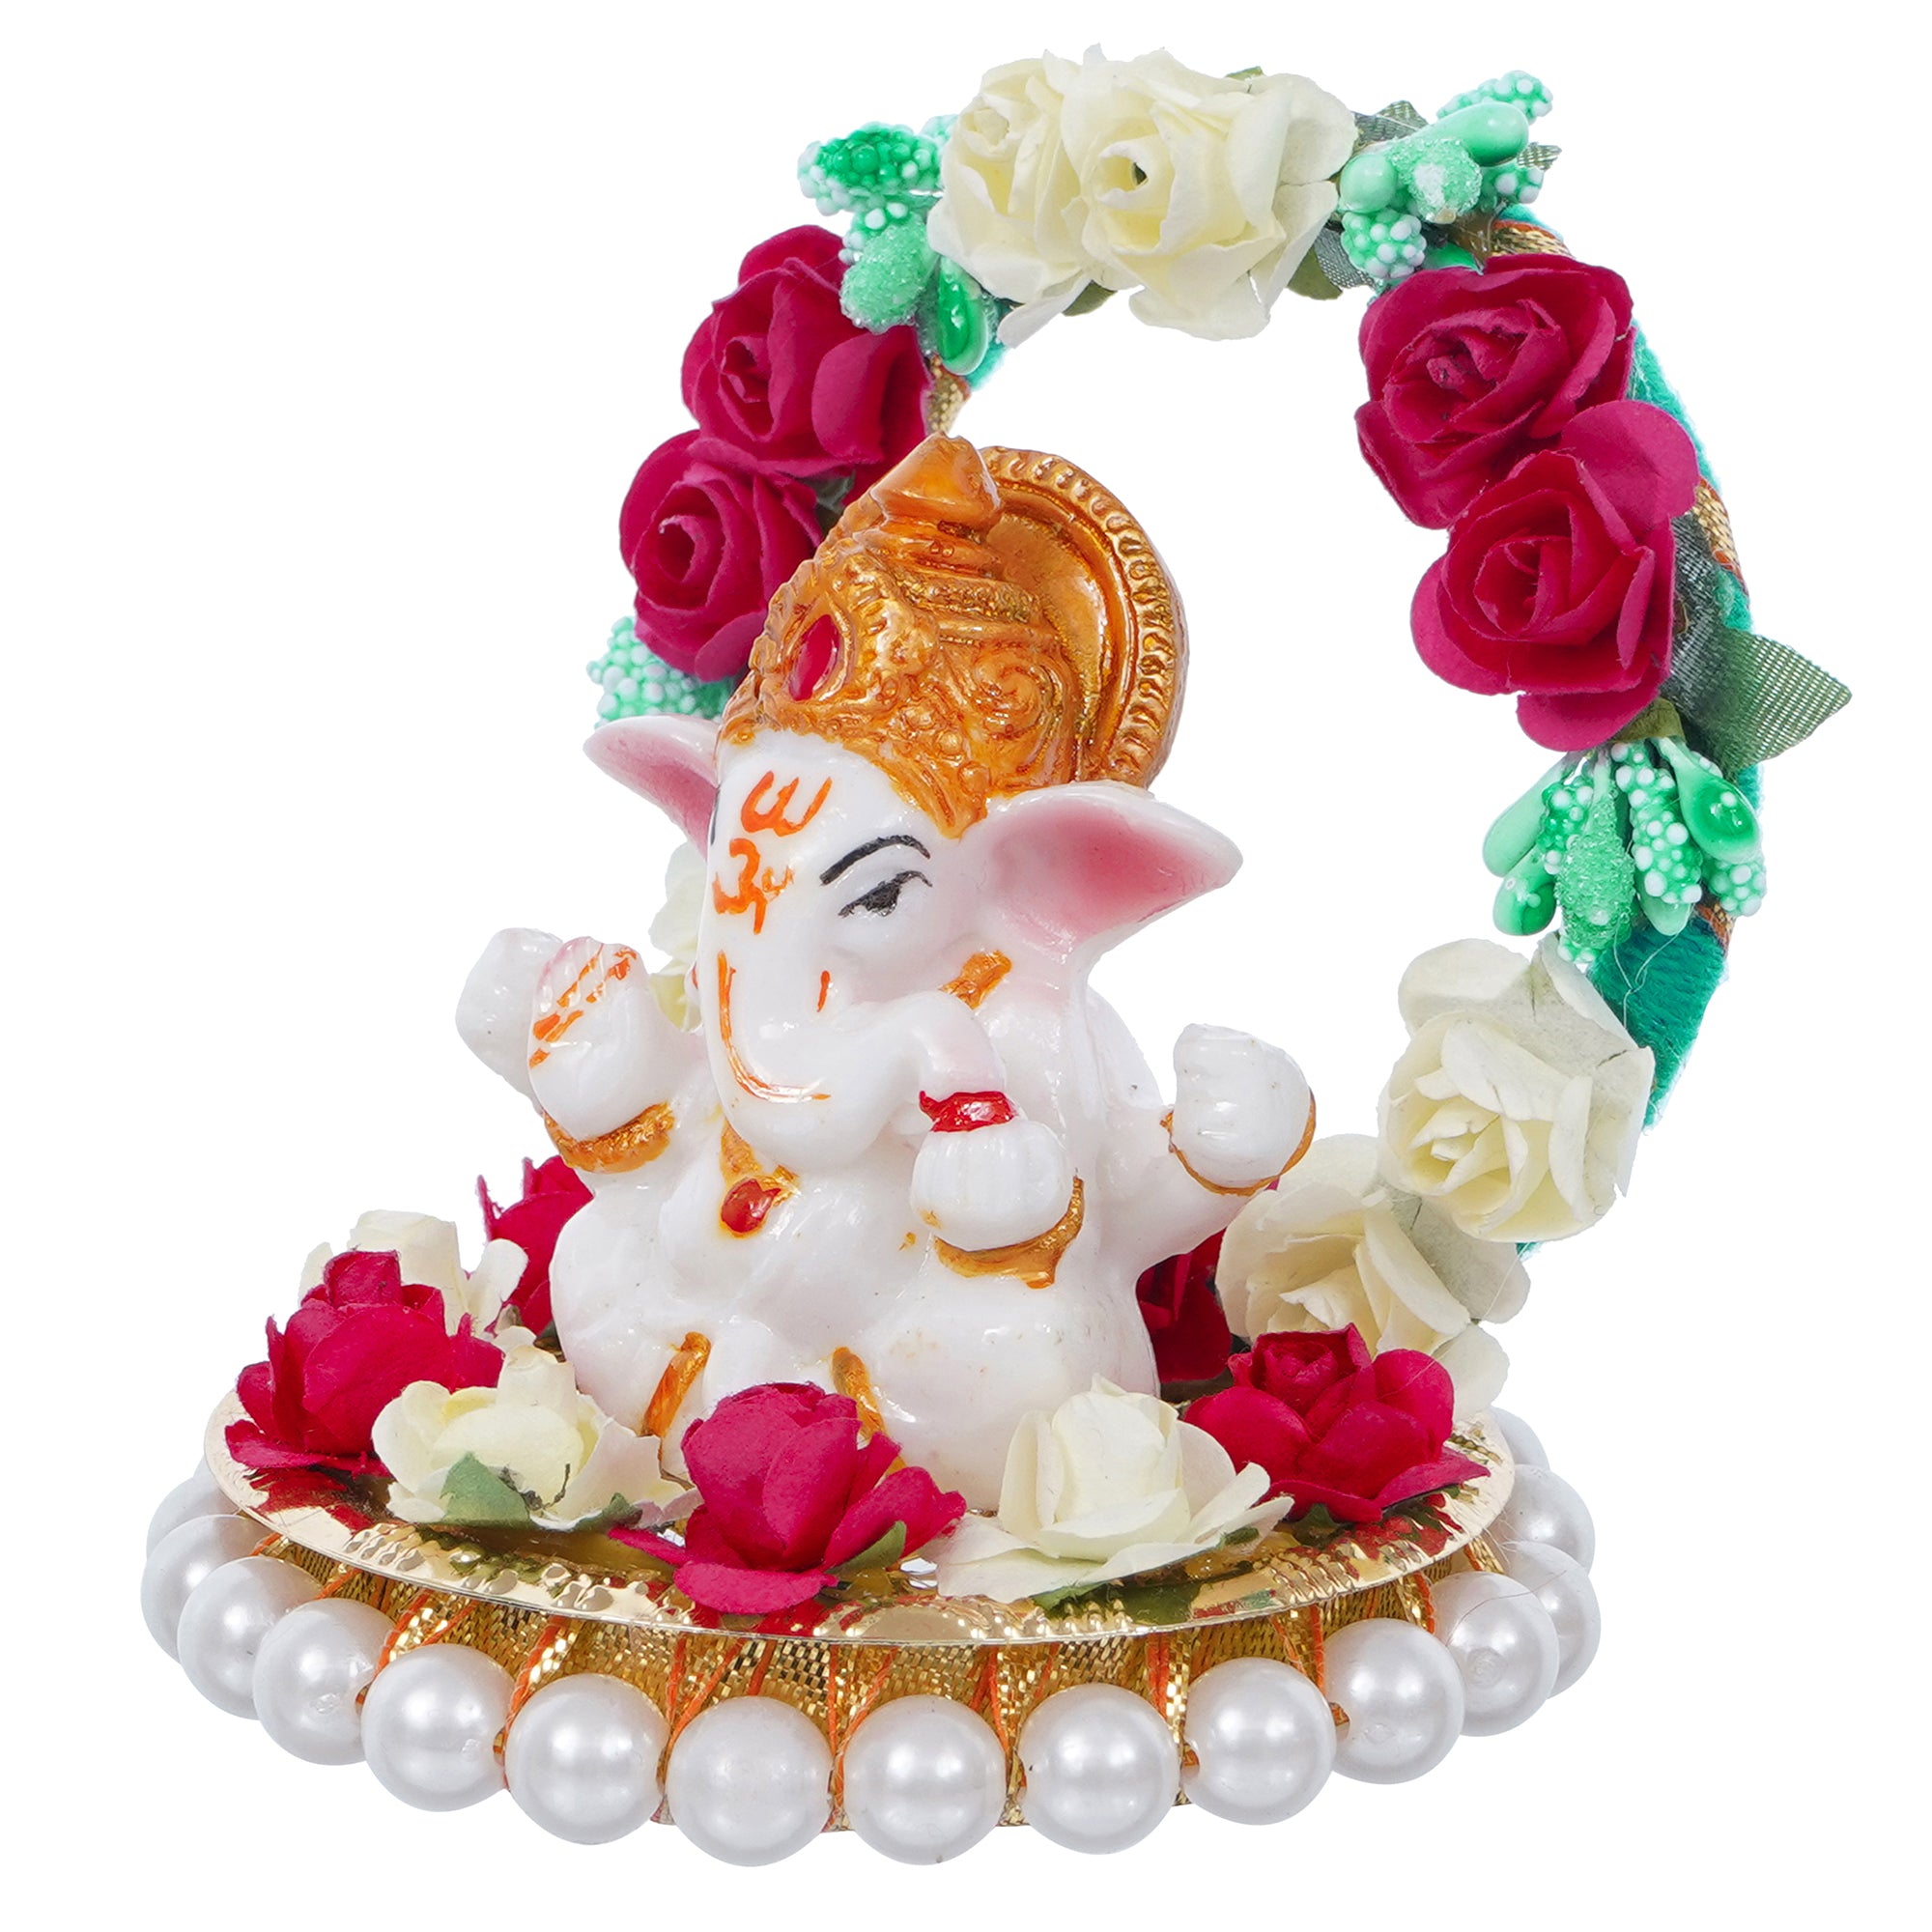 Polyresin Lord Ganesha Idol on Decorative Handcrafted Plate with Throne of Colorful Flowers 5